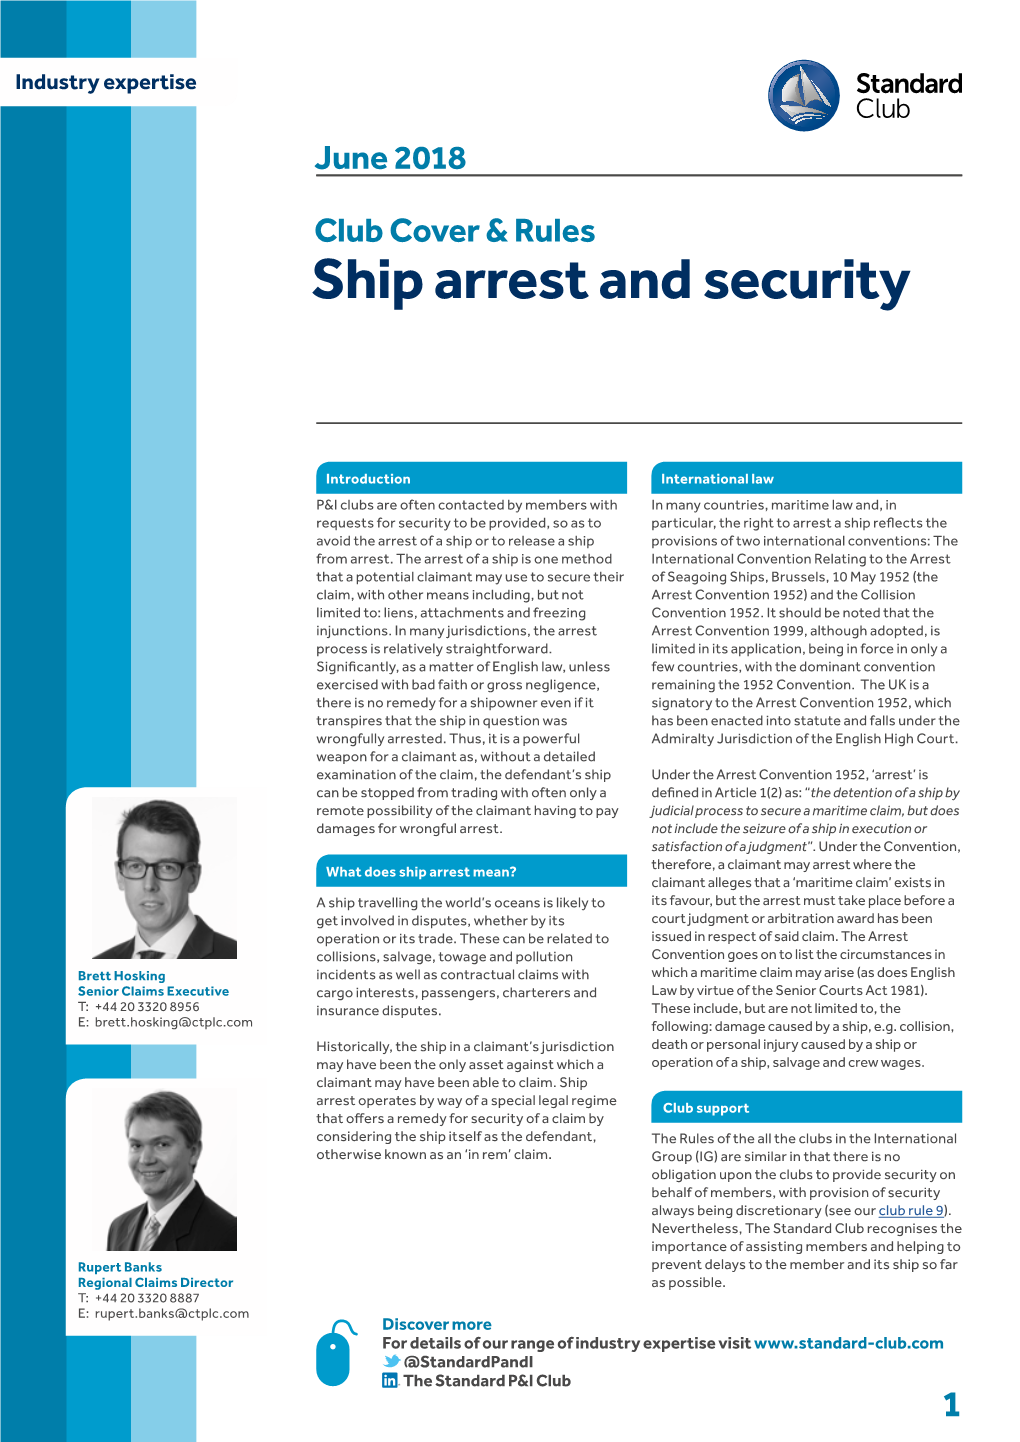 Ship Arrest and Security